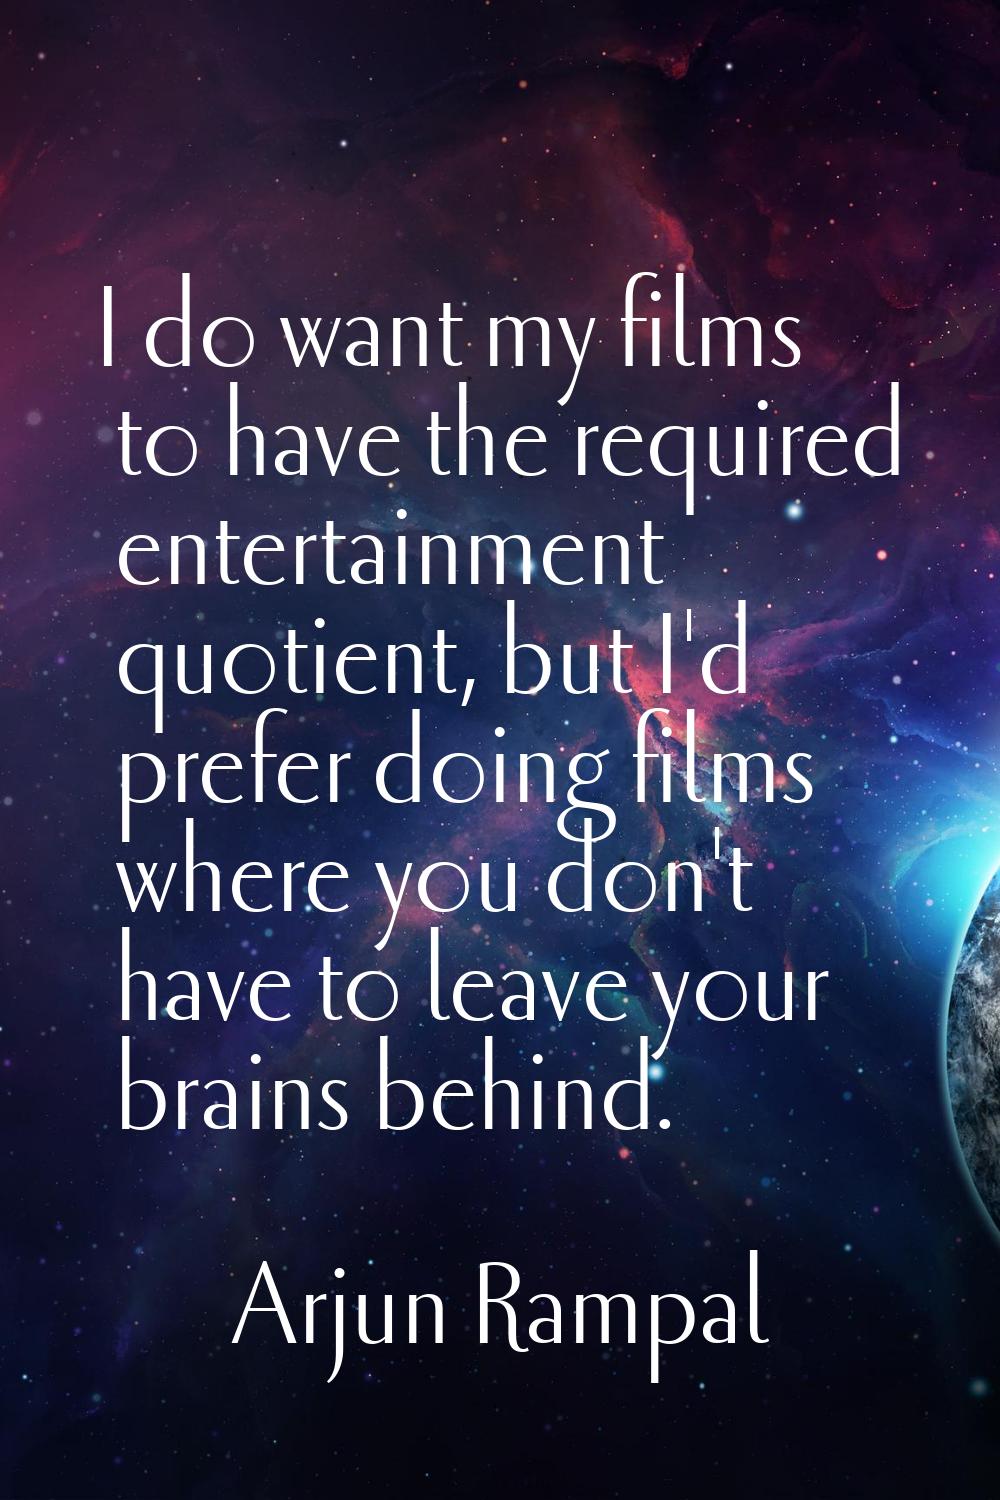 I do want my films to have the required entertainment quotient, but I'd prefer doing films where yo